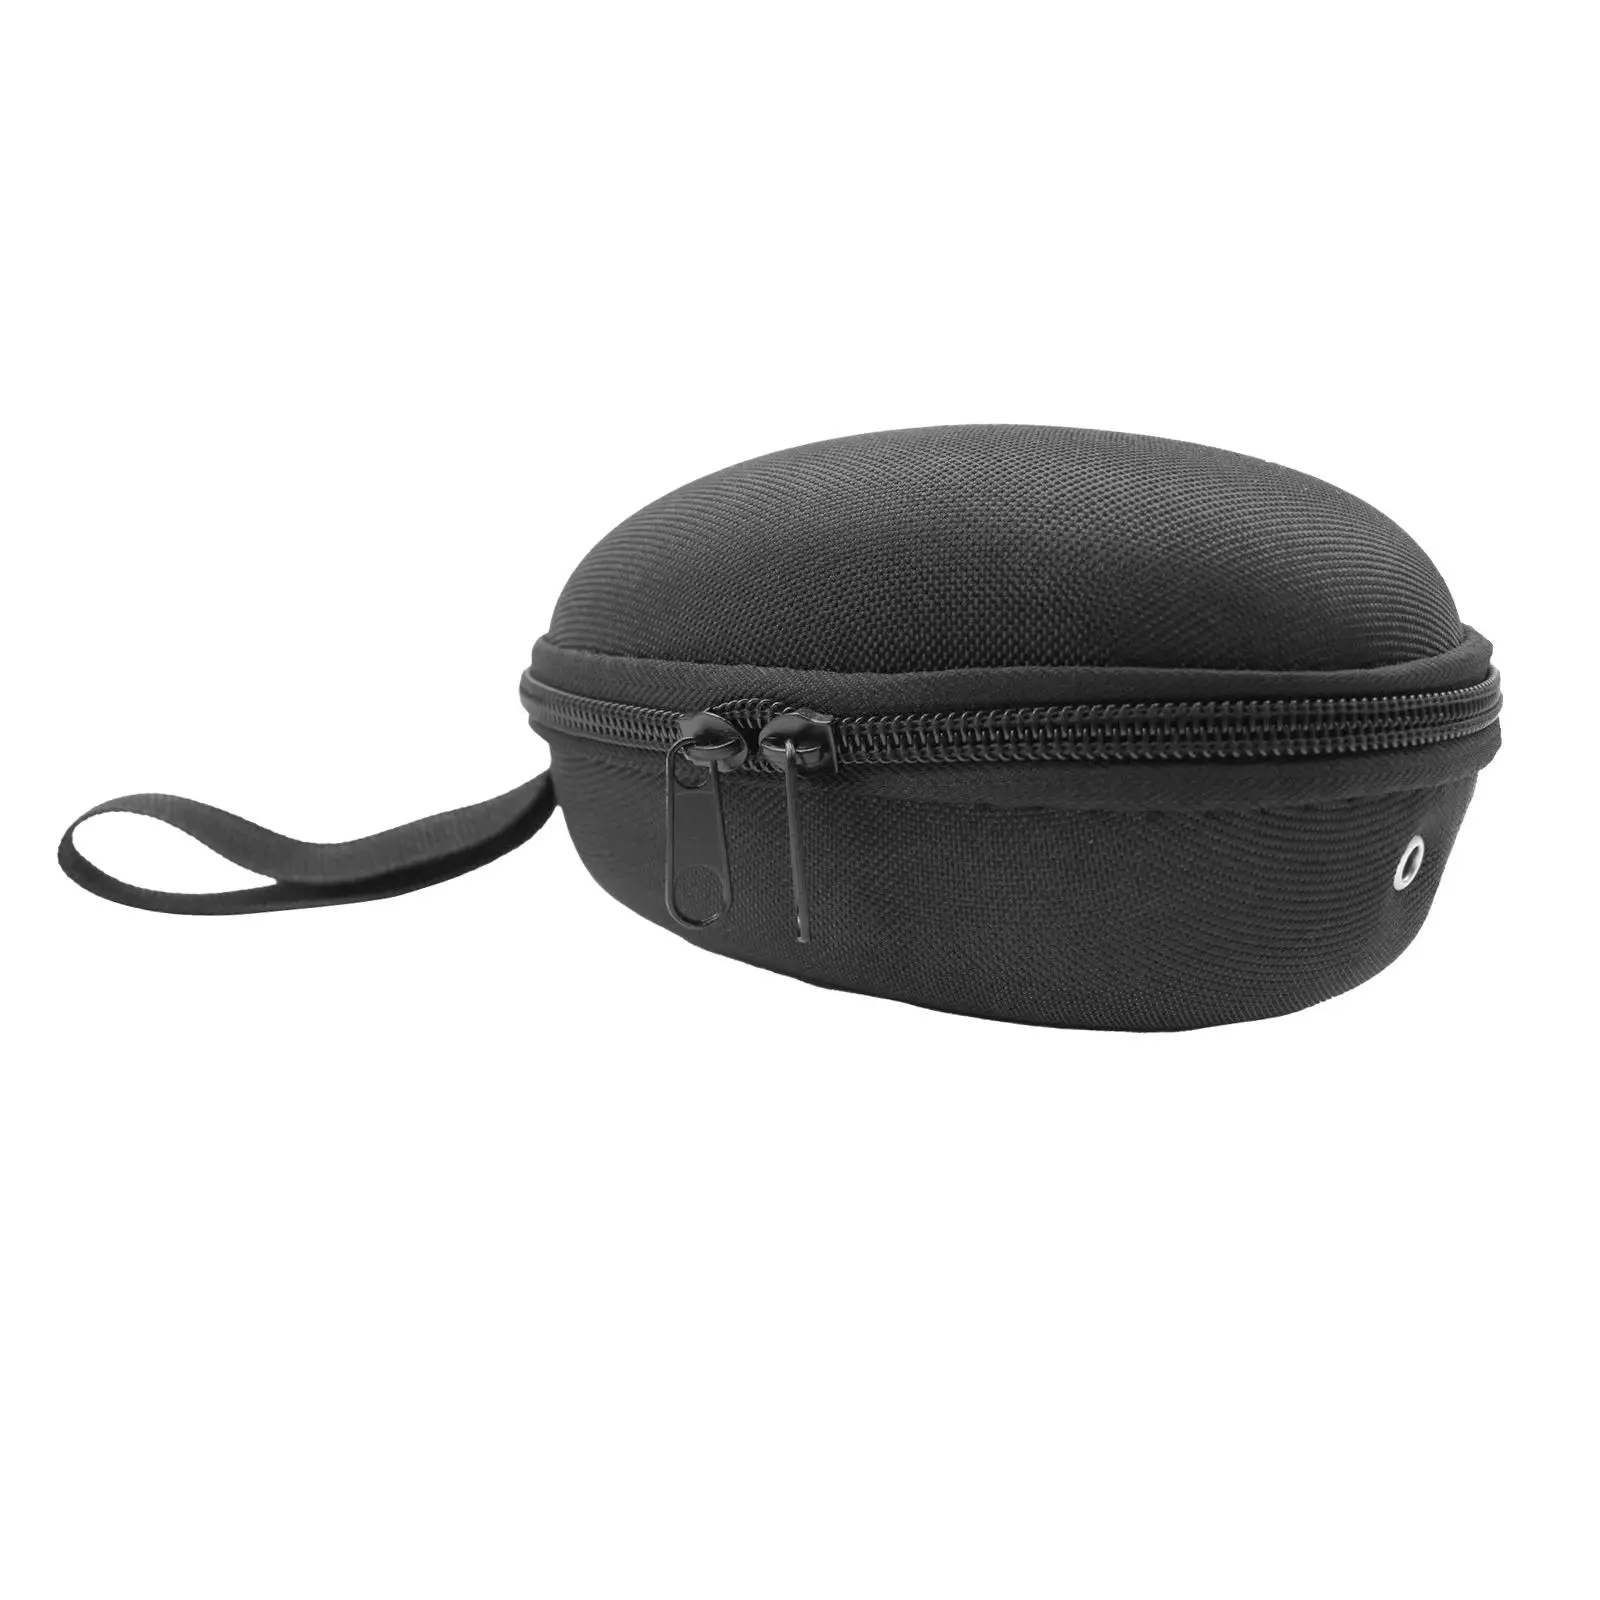 Portable Fishing Reel Cover Protective Case Cover Fishing Gear Organizer Fishing Pouch Bag for Bait Casting Fishing Accessories